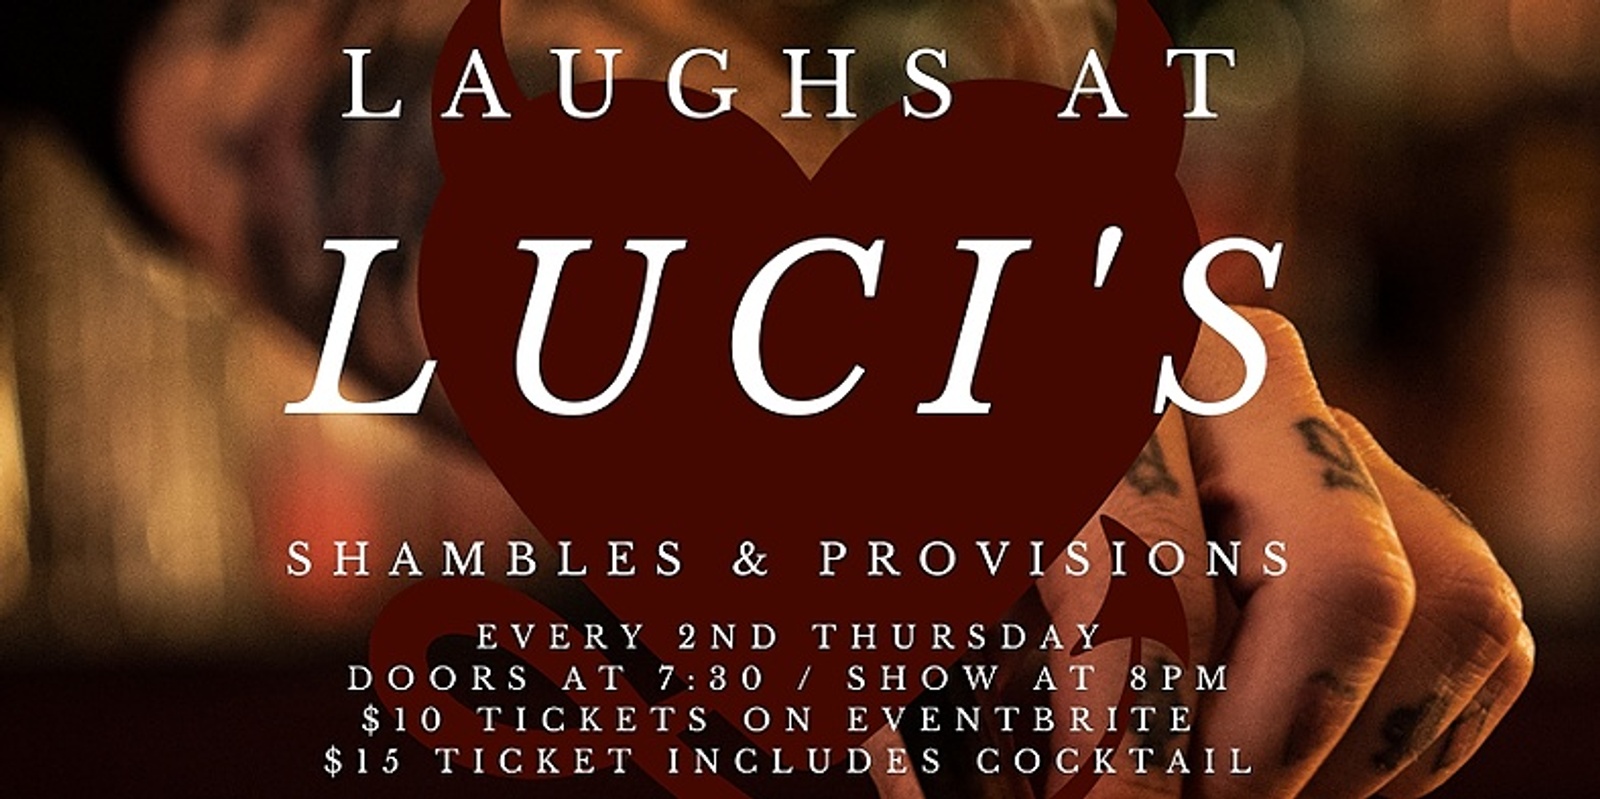 Banner image for Laughs at Luci's Shambles & Provisions